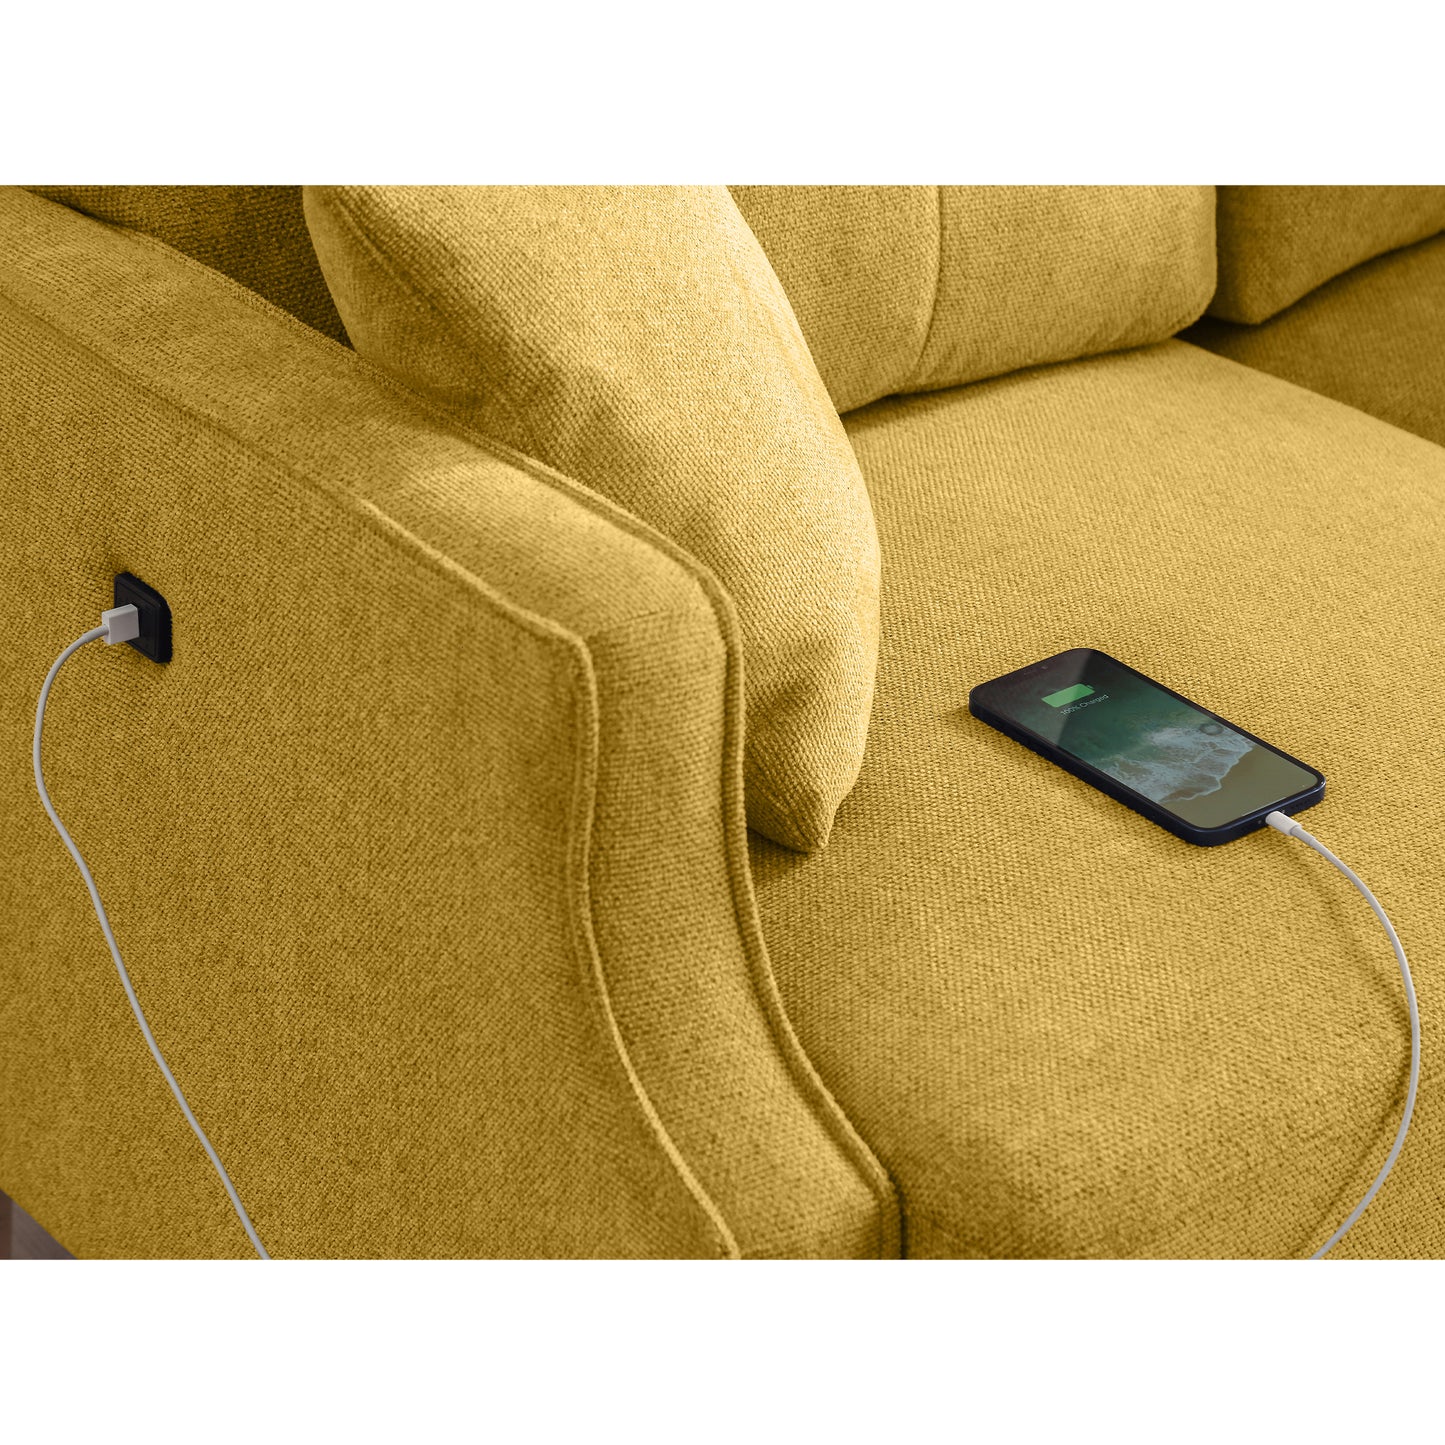 Living Space sofa 3 seater With Waterproof Fabric , USB Charge port